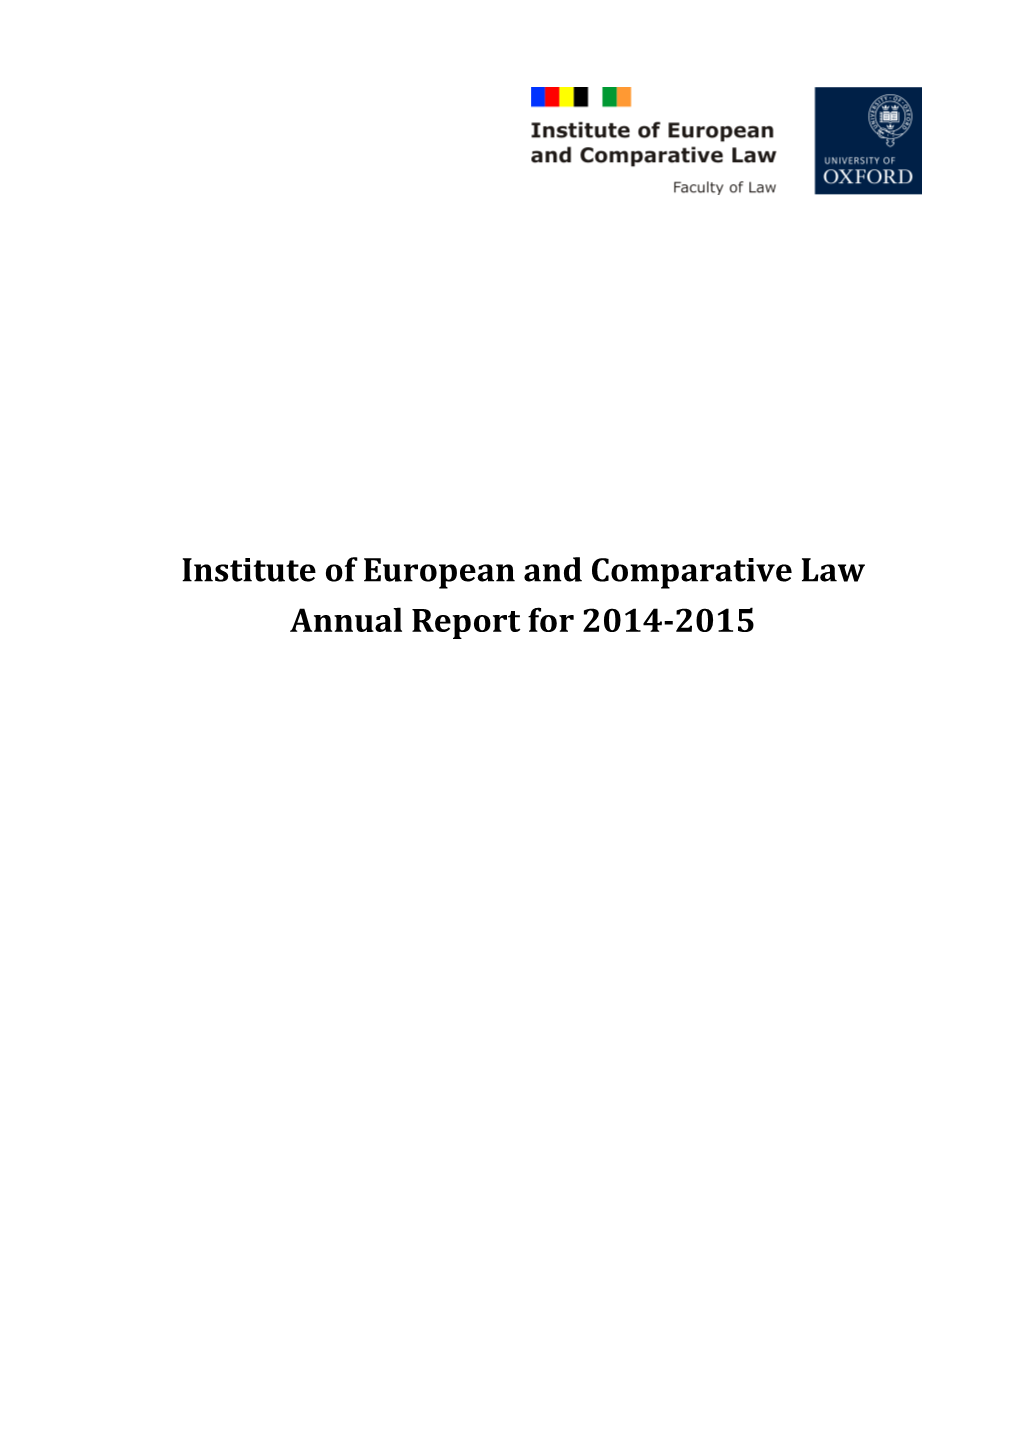 Institute of European and Comparative Law Annual Report for 2014-2015